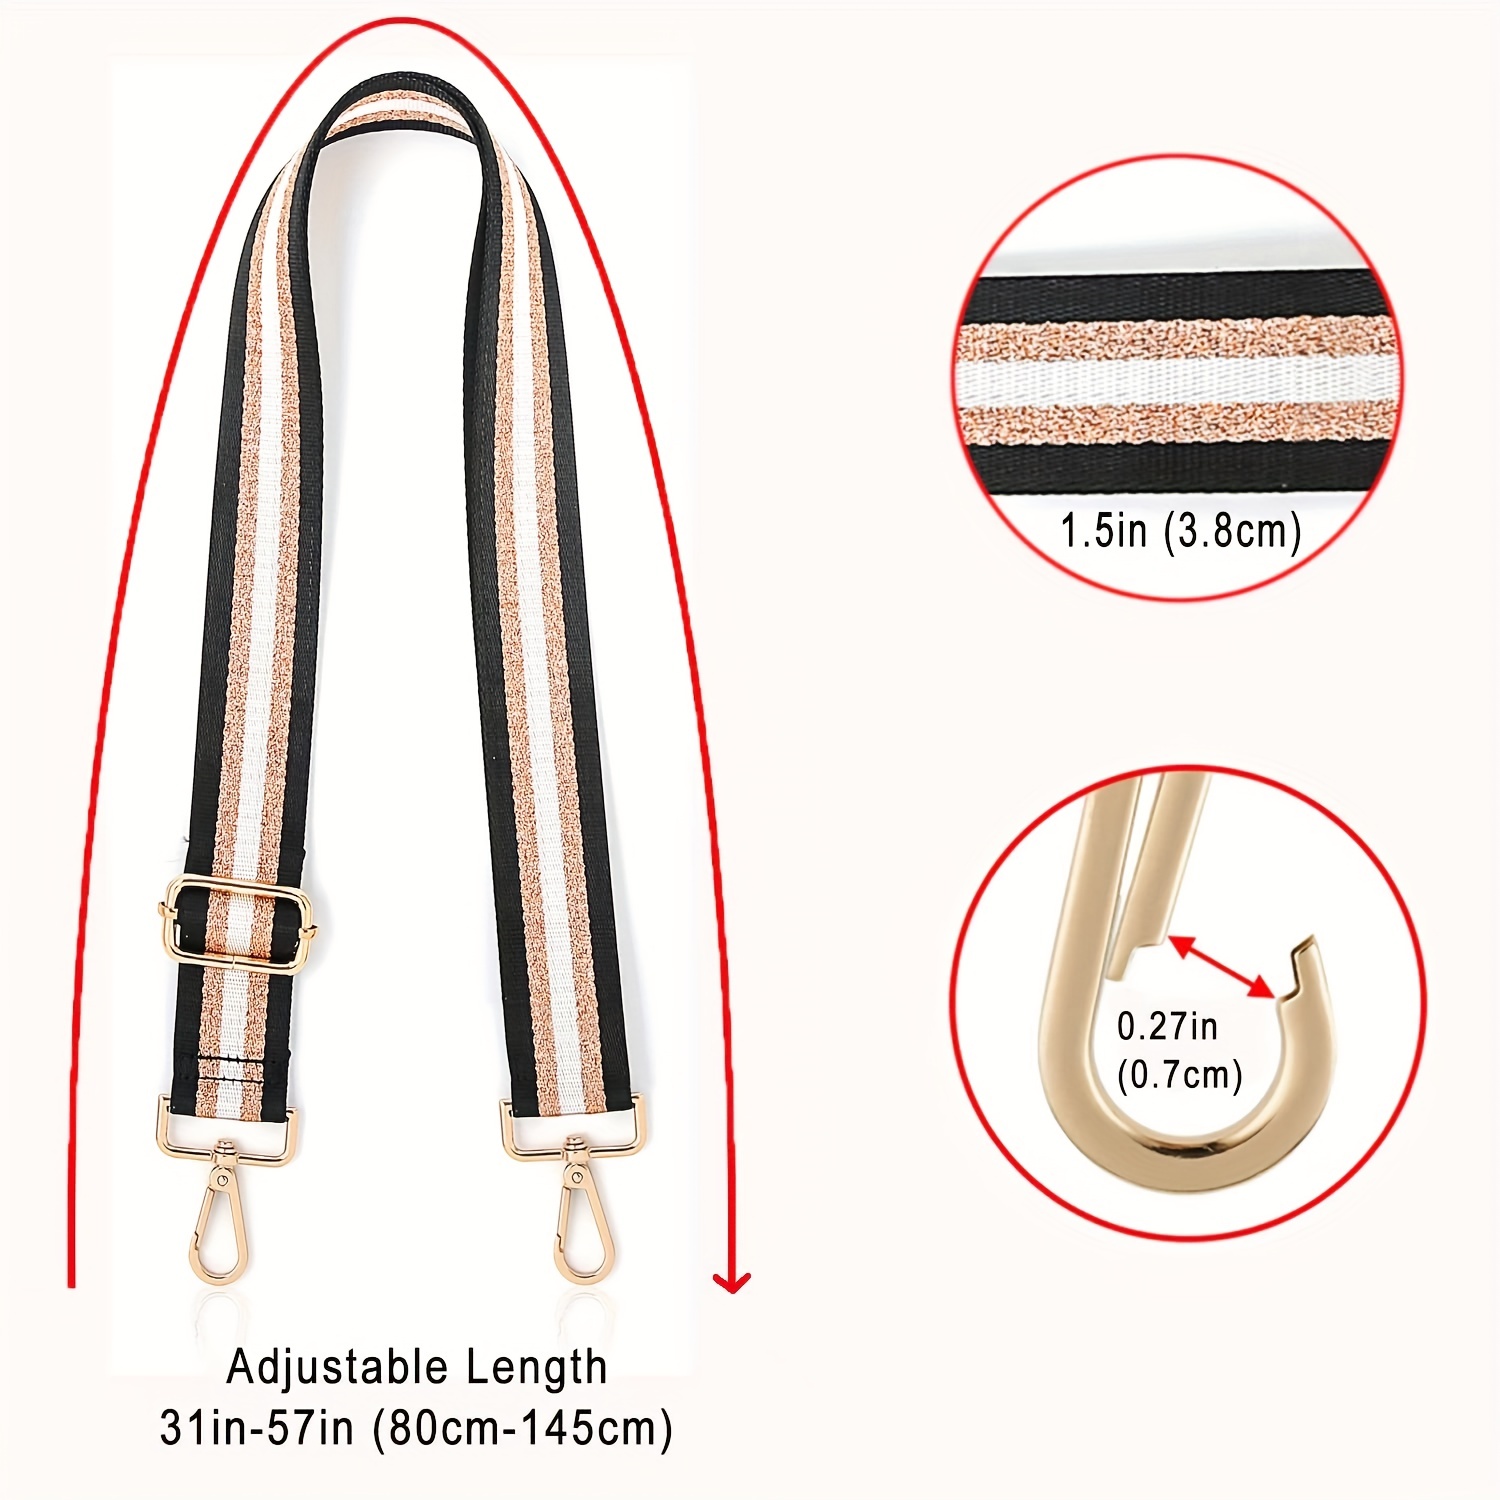 3.8cm Replacement Purse Strap,wide Adjustable Crossbody Straps For